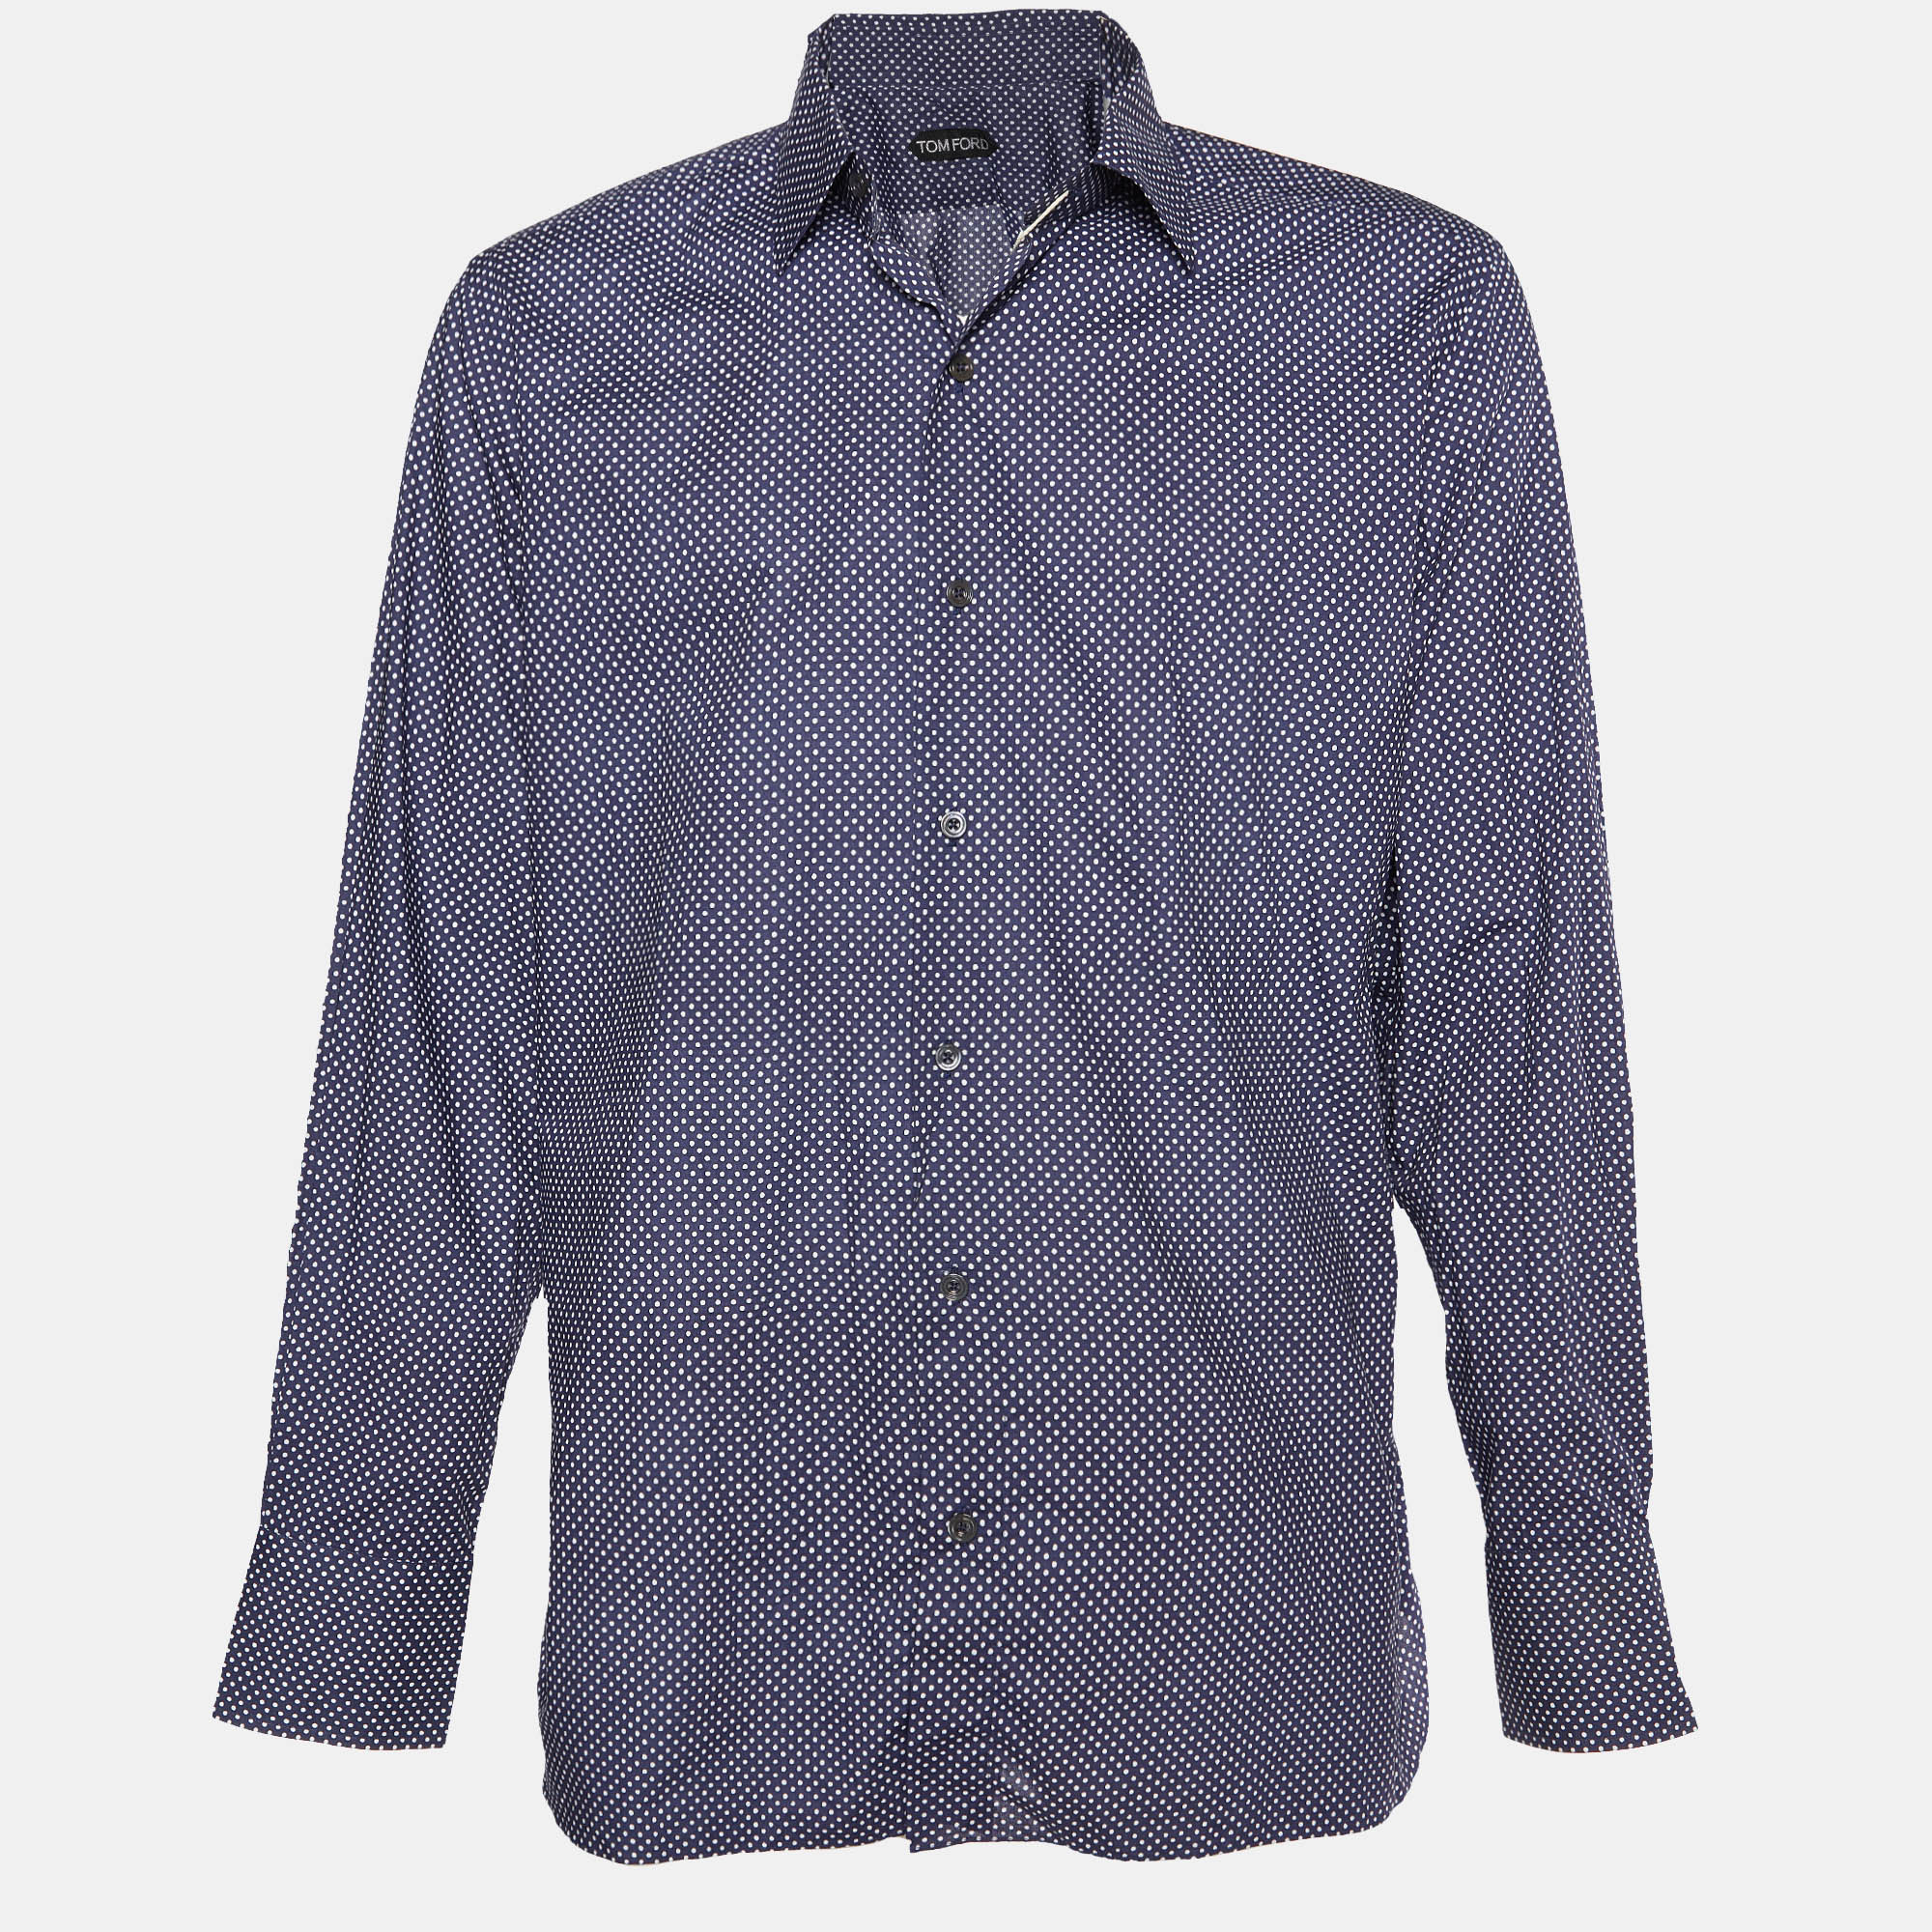 Tom ford polka dot button front shirt 44